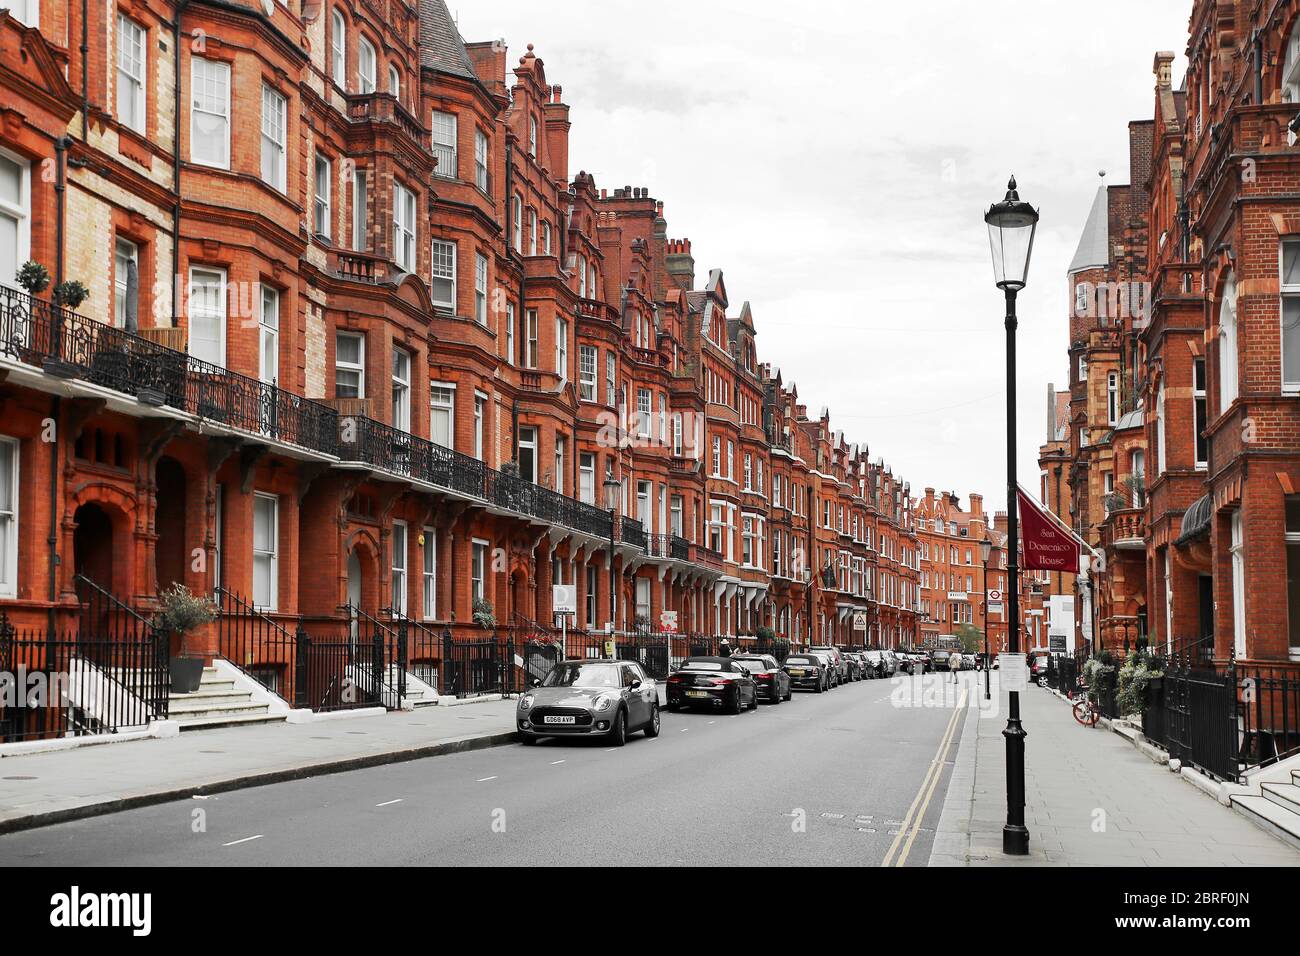 Brick row houses along Draycott Place and Cadogan Gardens near Cadogan Square in the affluent and exclusive neighborhood of Chelsea, London Stock Photo